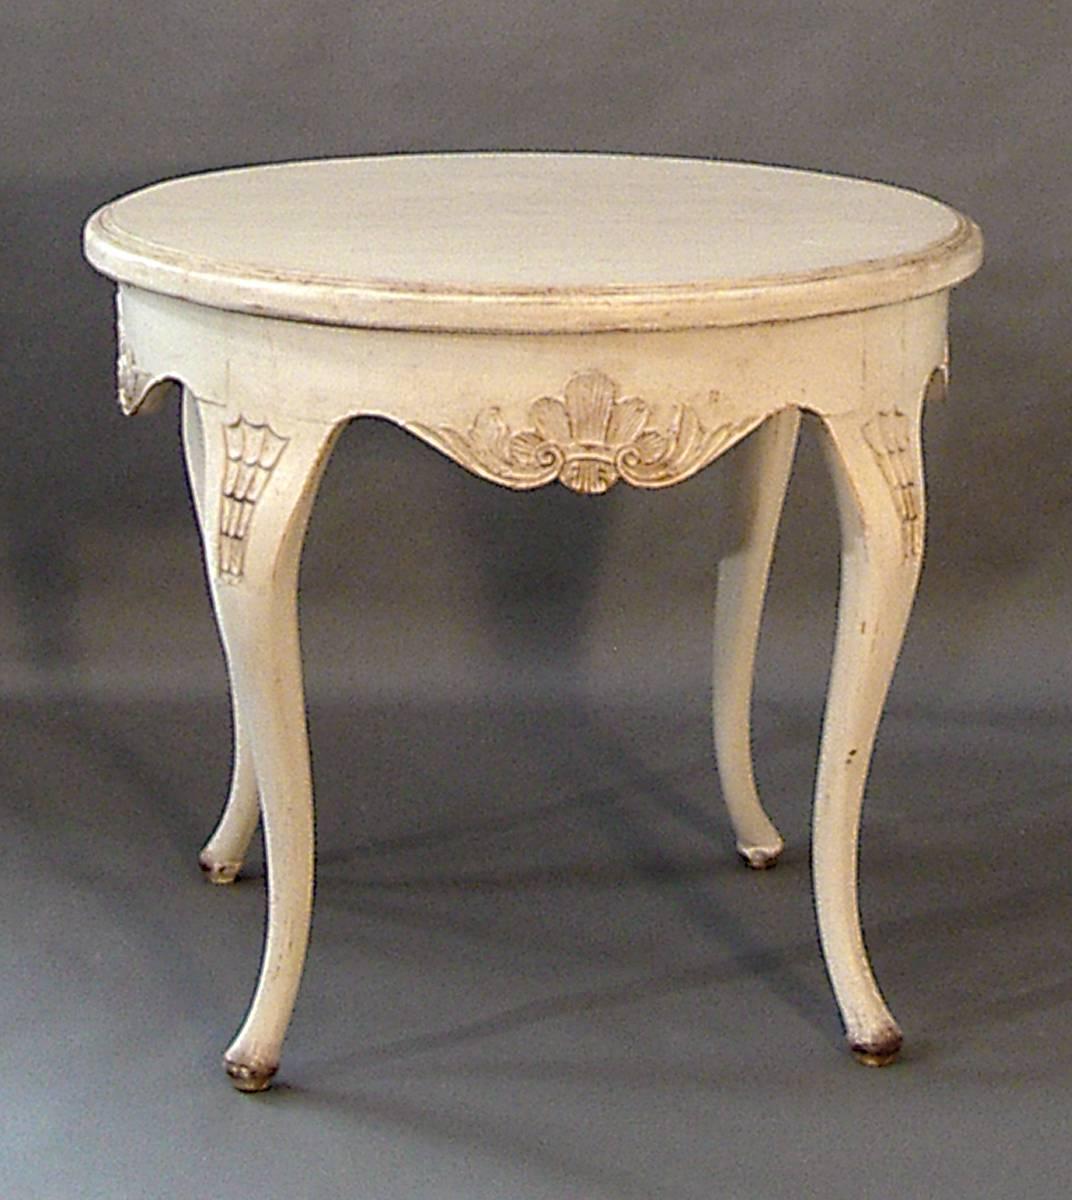 Swedish table in the Rococo style, circa 1910, with graceful cabriole legs. Wonderful carving on both the apron and the legs. Excellent condition.